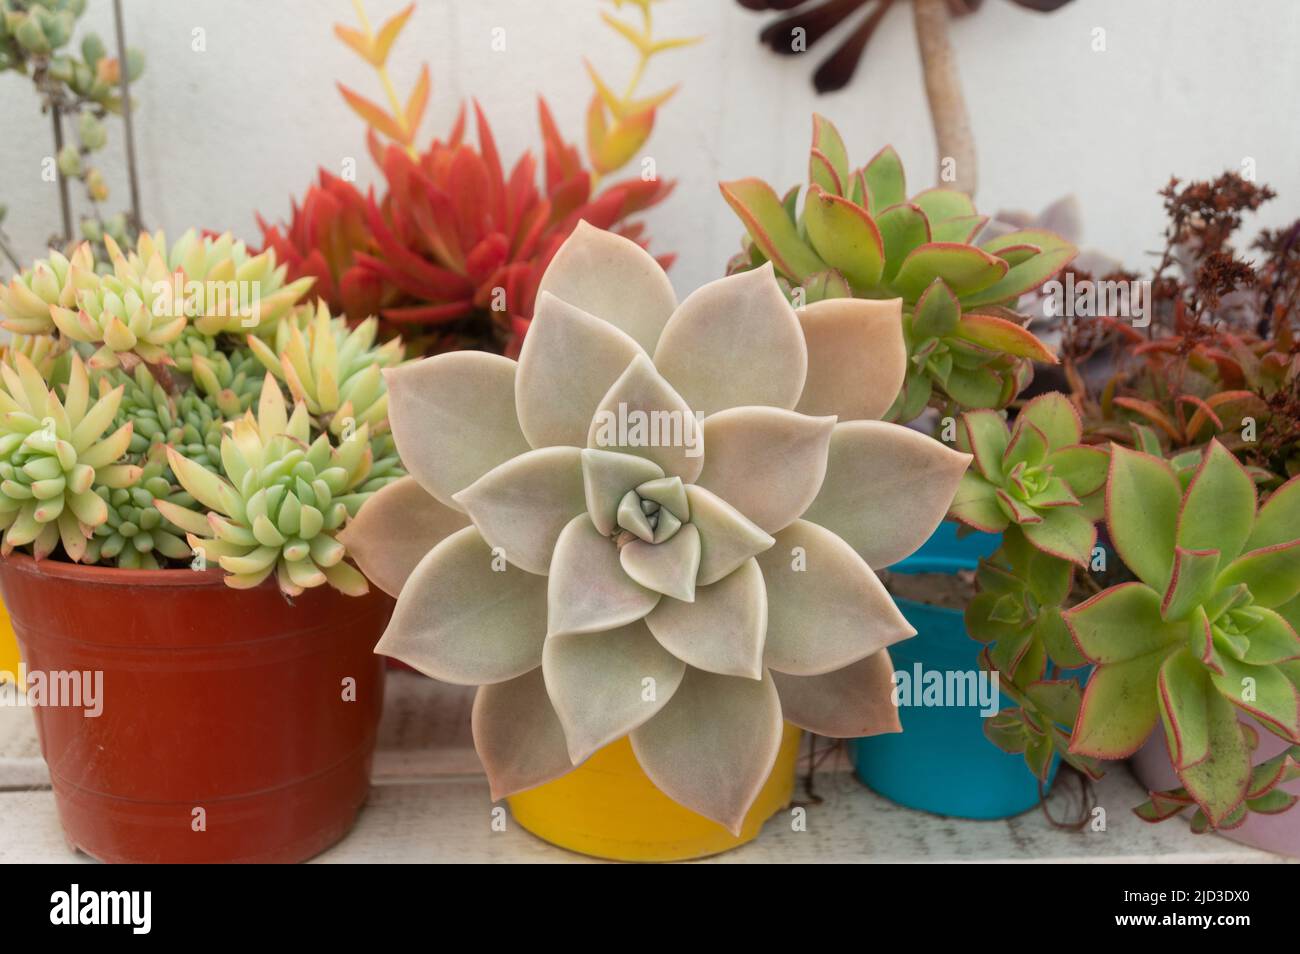 garden with succulents in pots Stock Photo